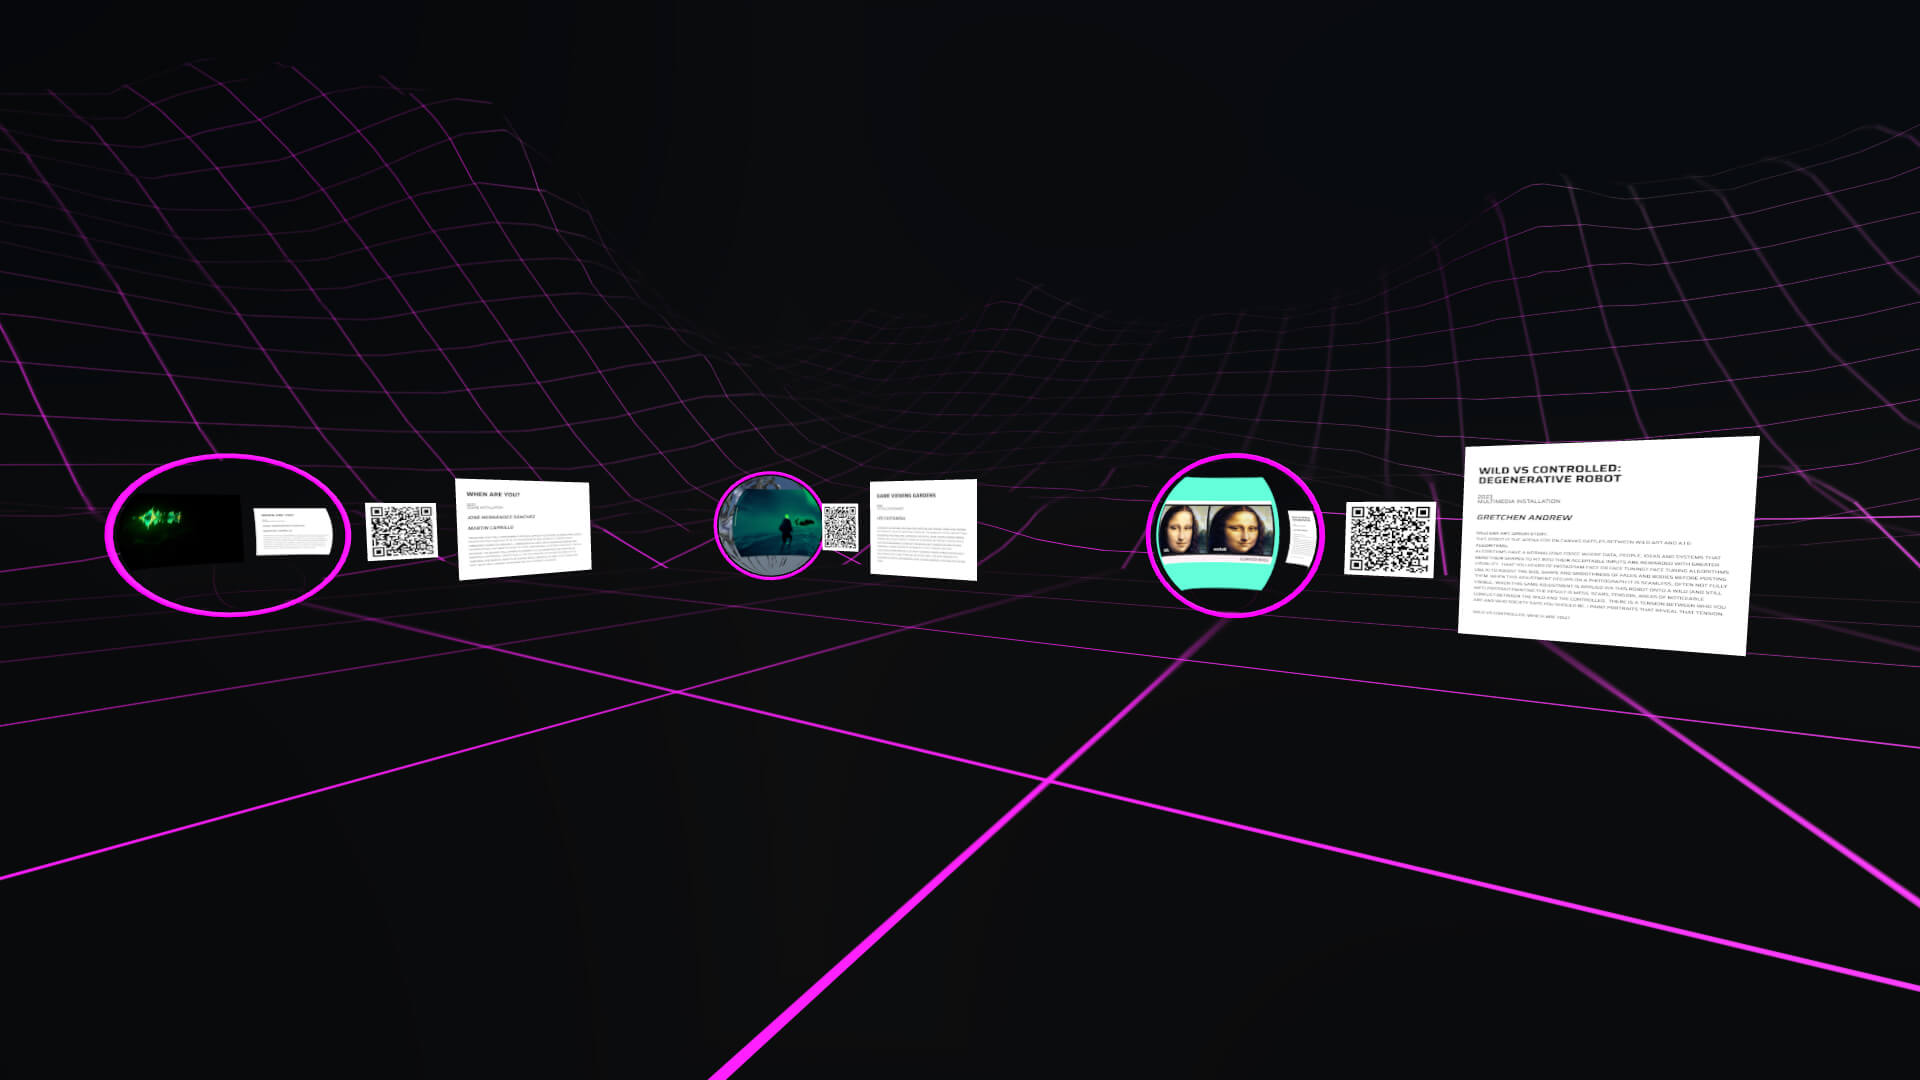 A scene in the metaverse where you can see different portals that lead to other scenes